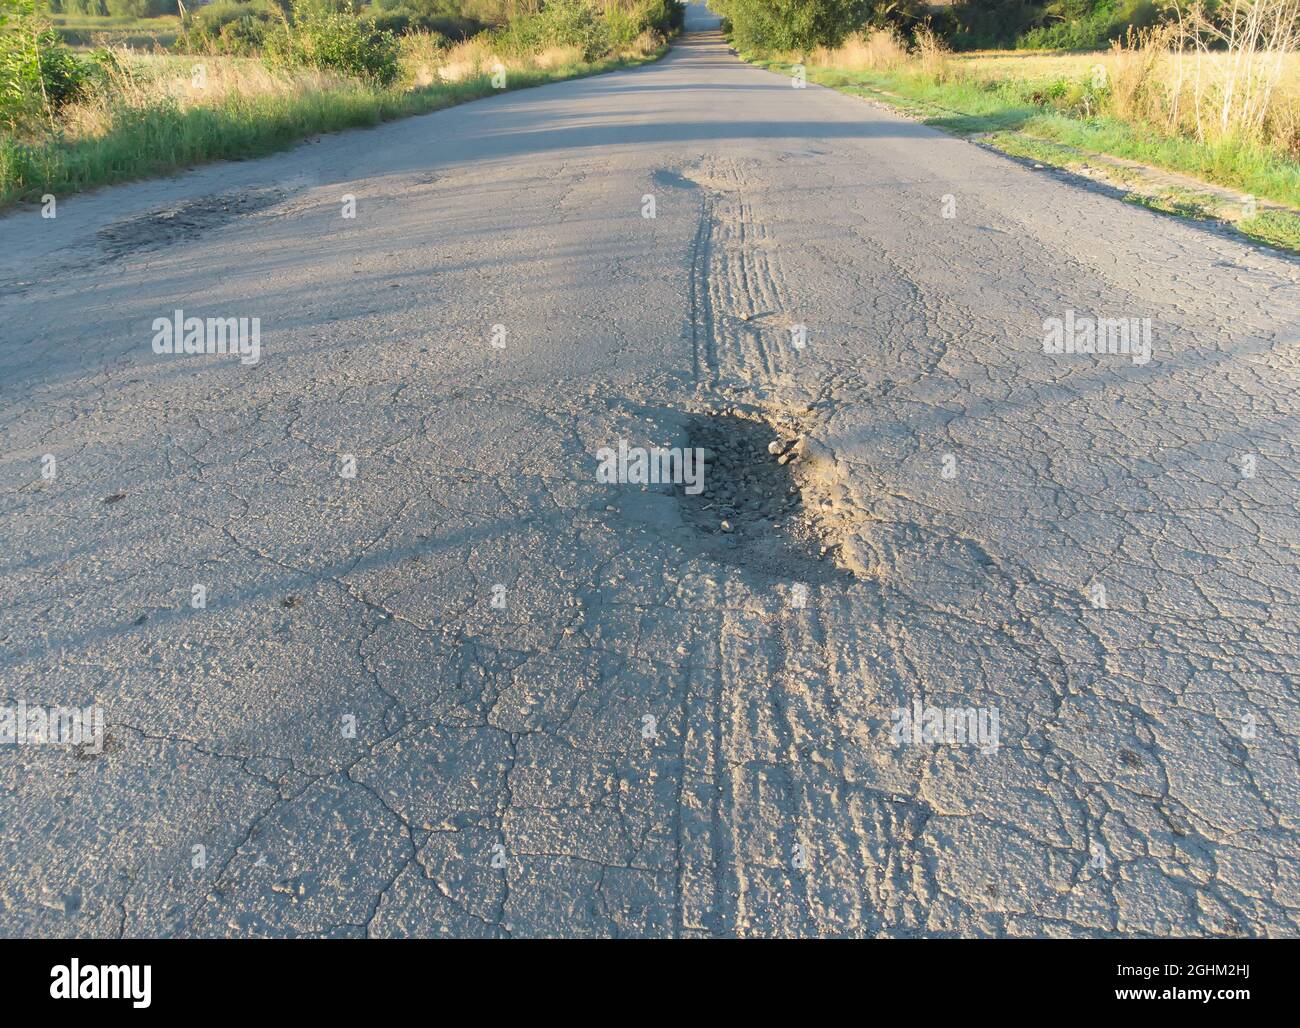 Asphalt road in poor condition with potholes and potholes Stock Photo